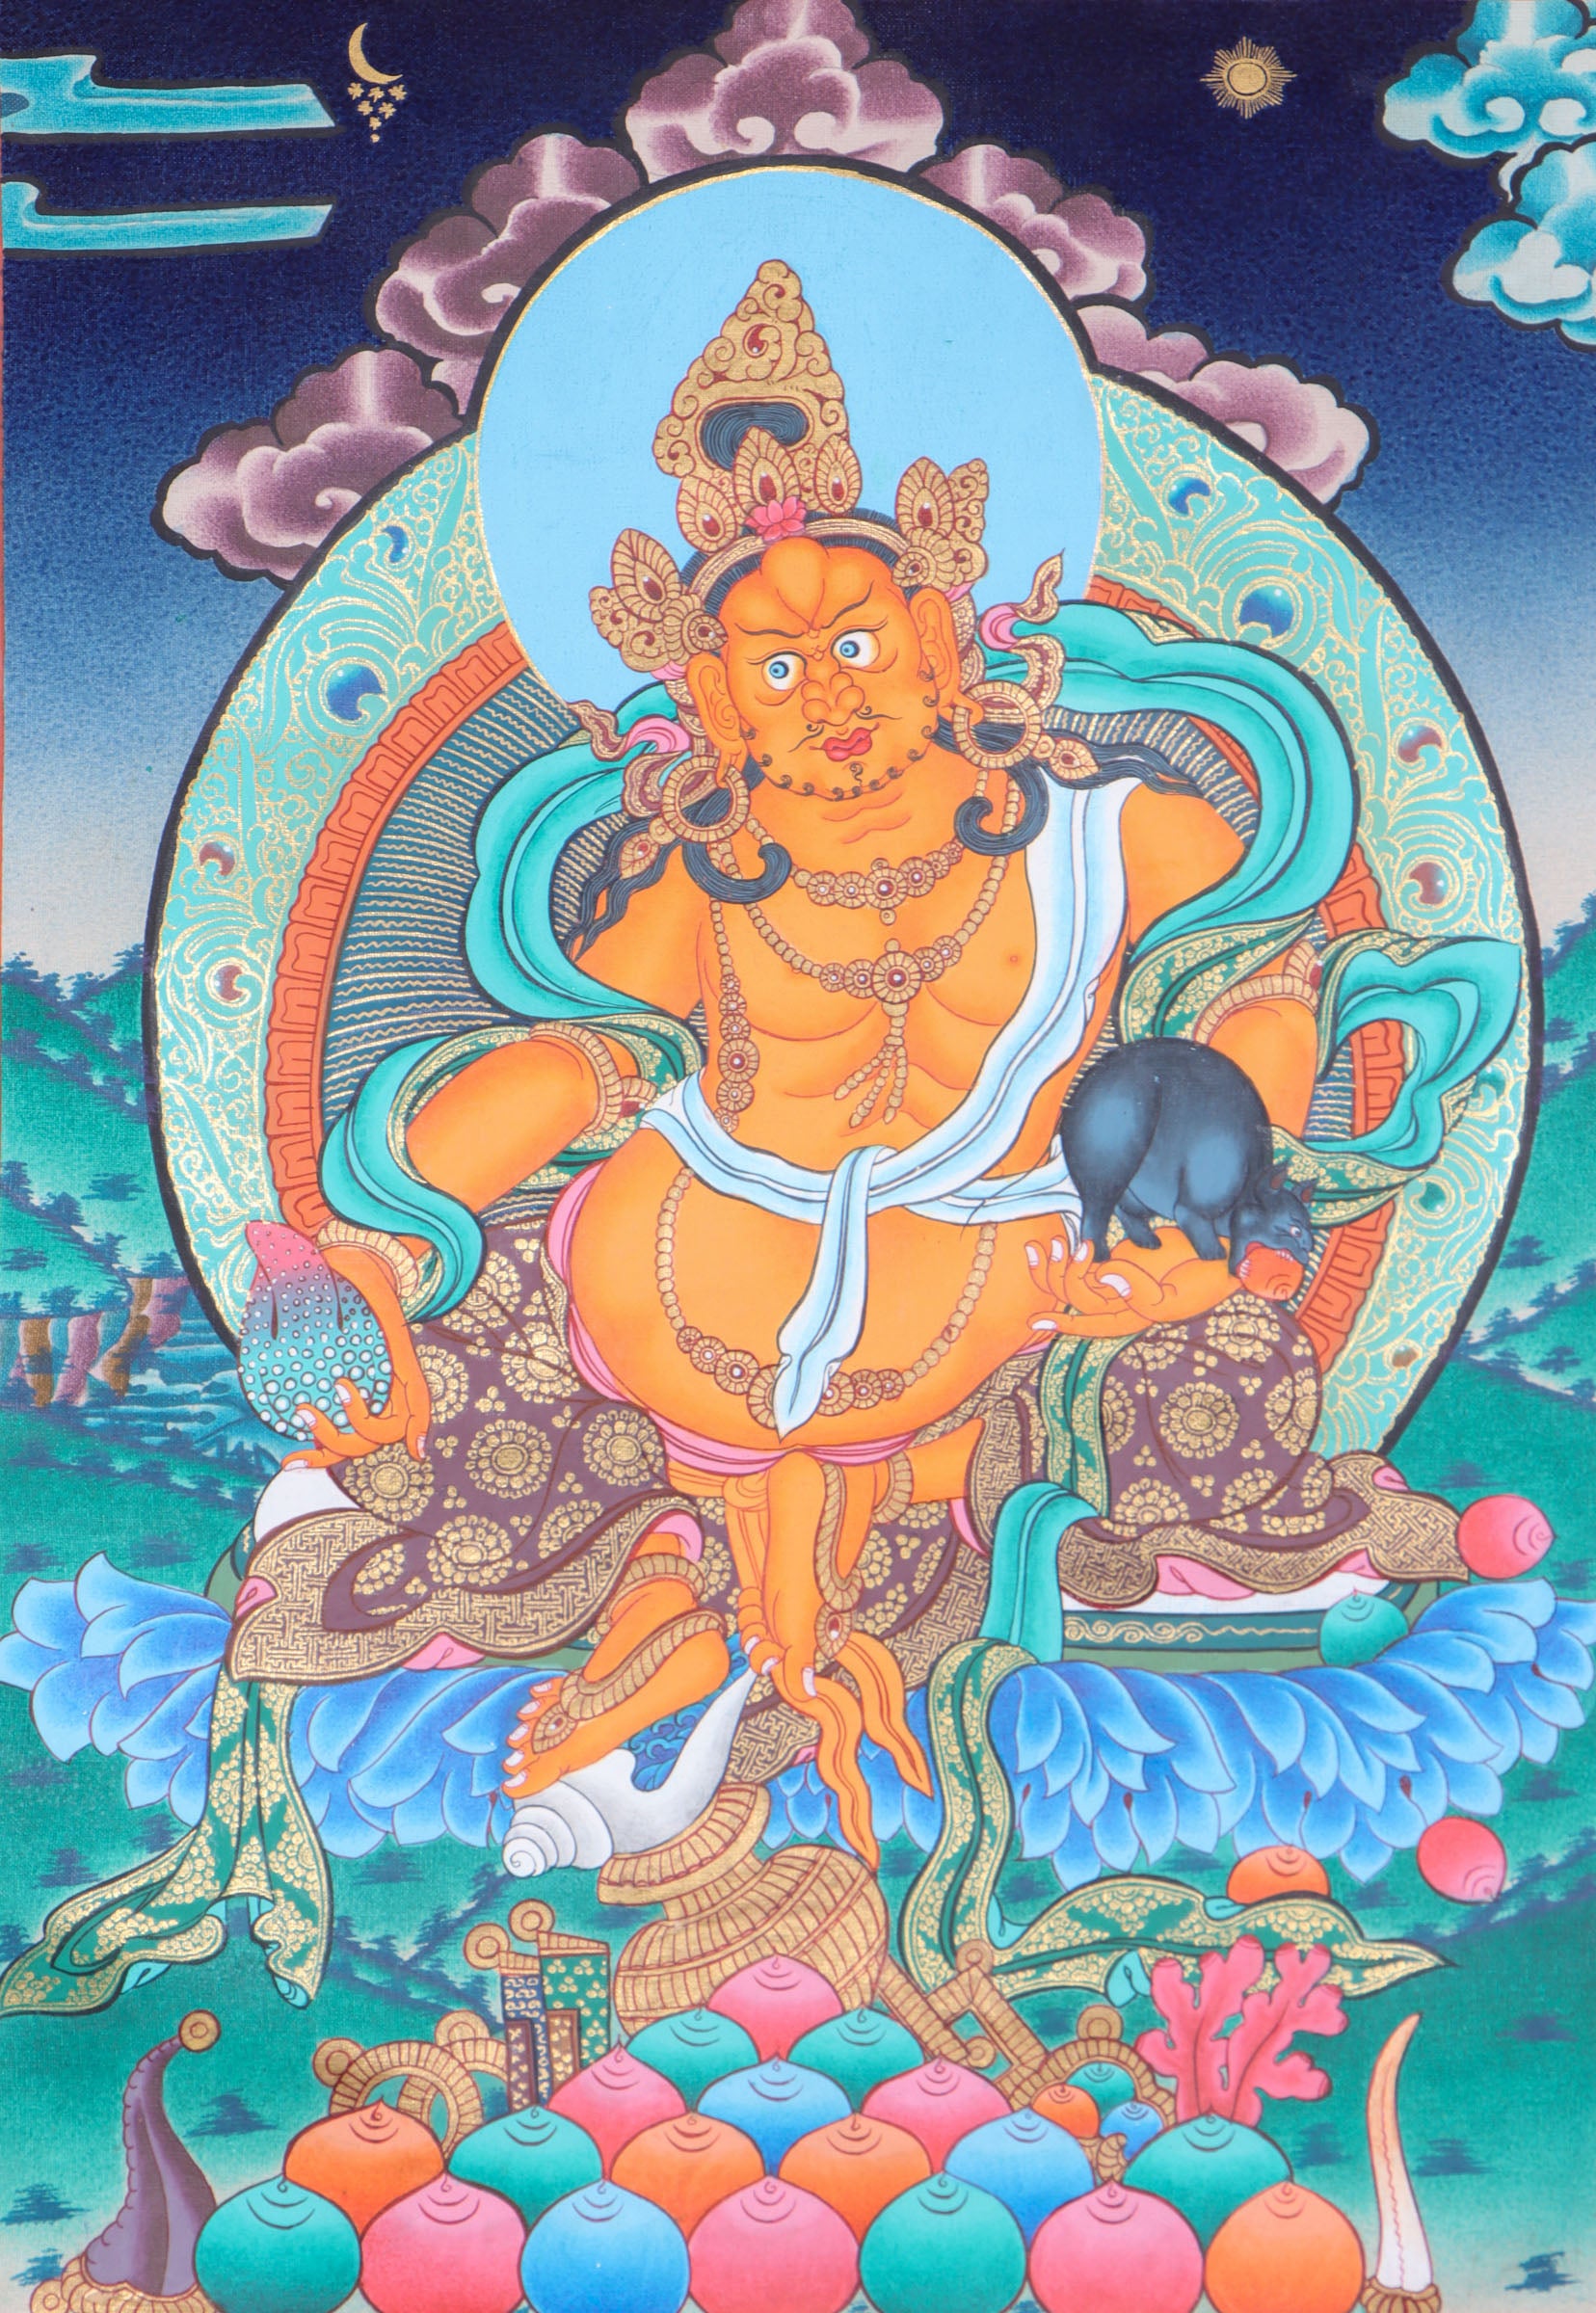 Jambhala, a wealth deity, helps remove poverty and brings abundance to Dharma practitioners.